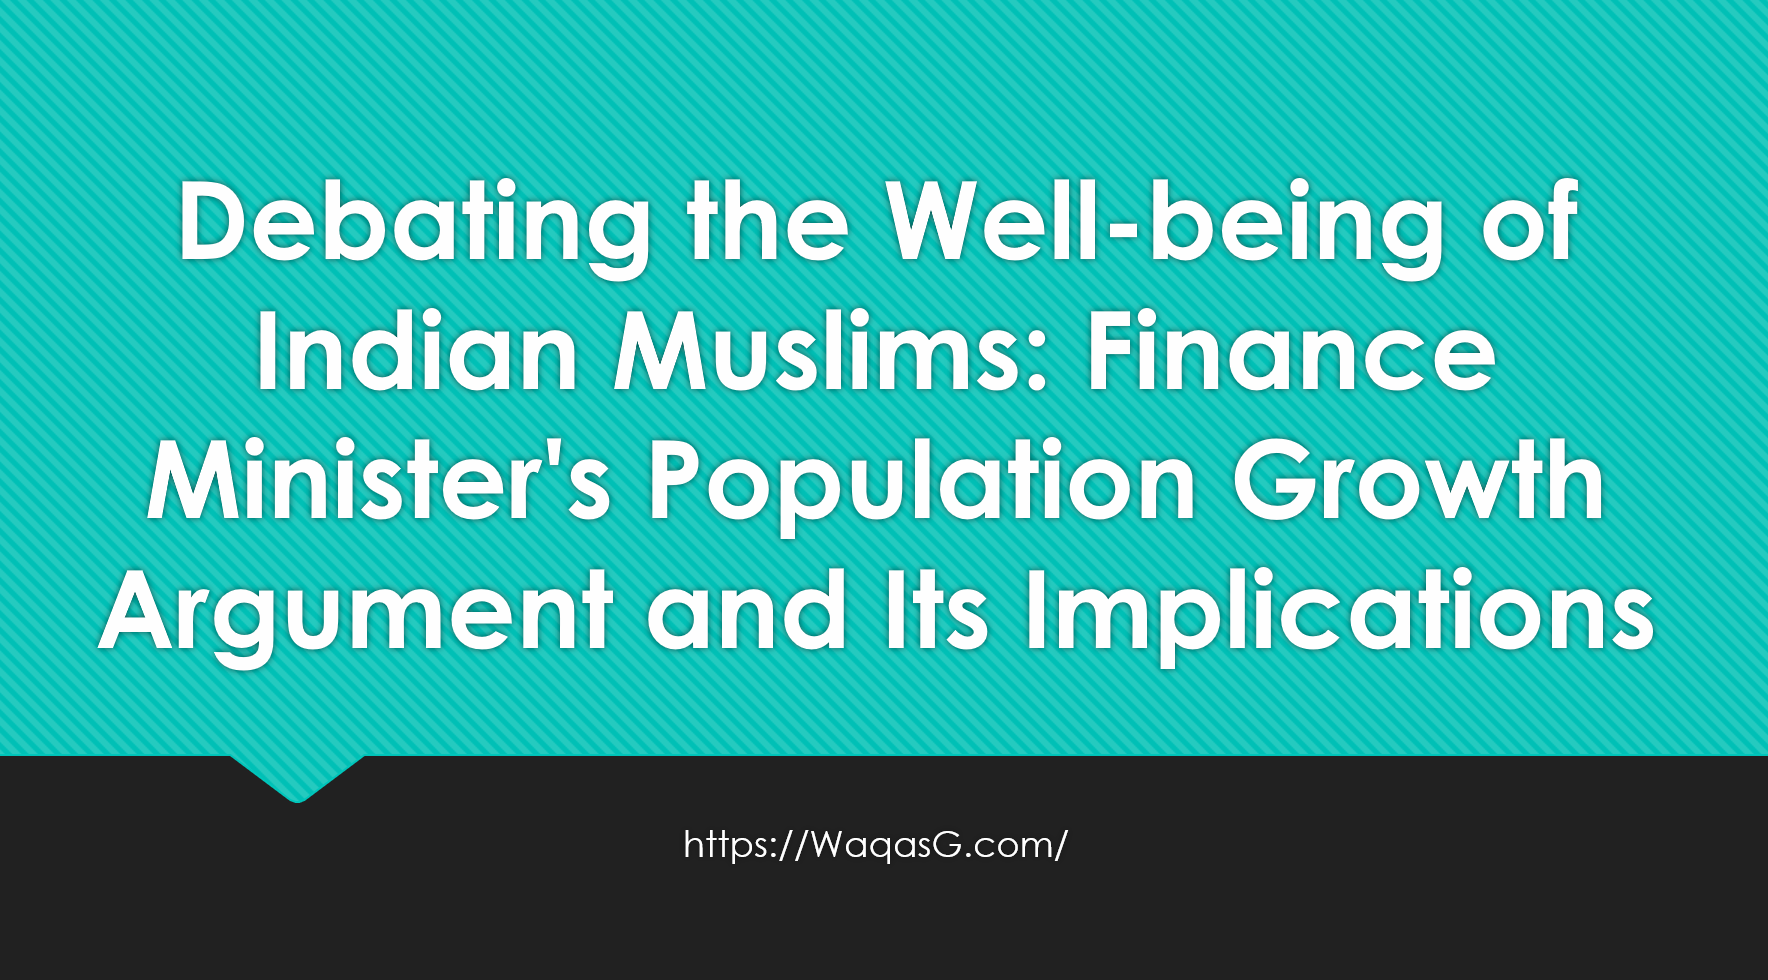 Debating the Well-being of Indian Muslims: Finance Minister's Population Growth Argument and Its Implications